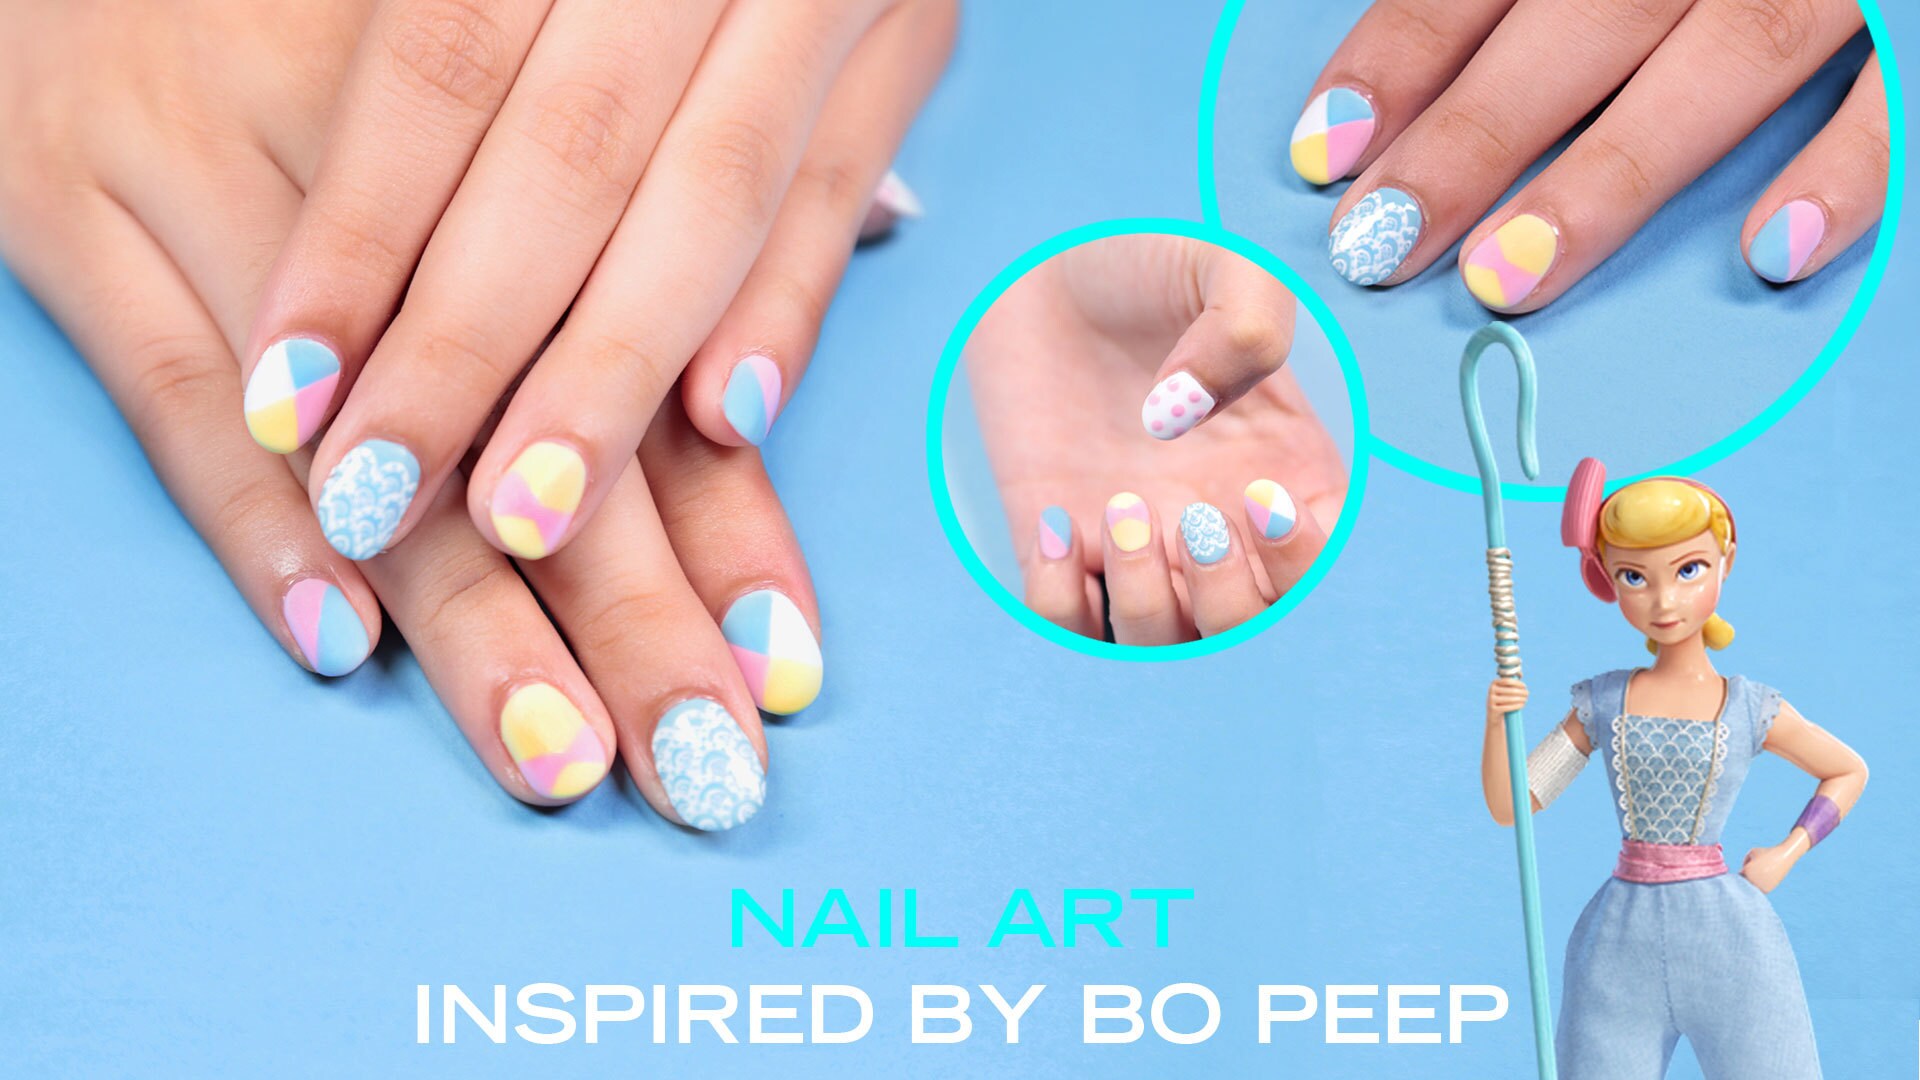 Disney Style: Nail art inspired by Bo Peep from Disney and Pixar's Toy Story 4